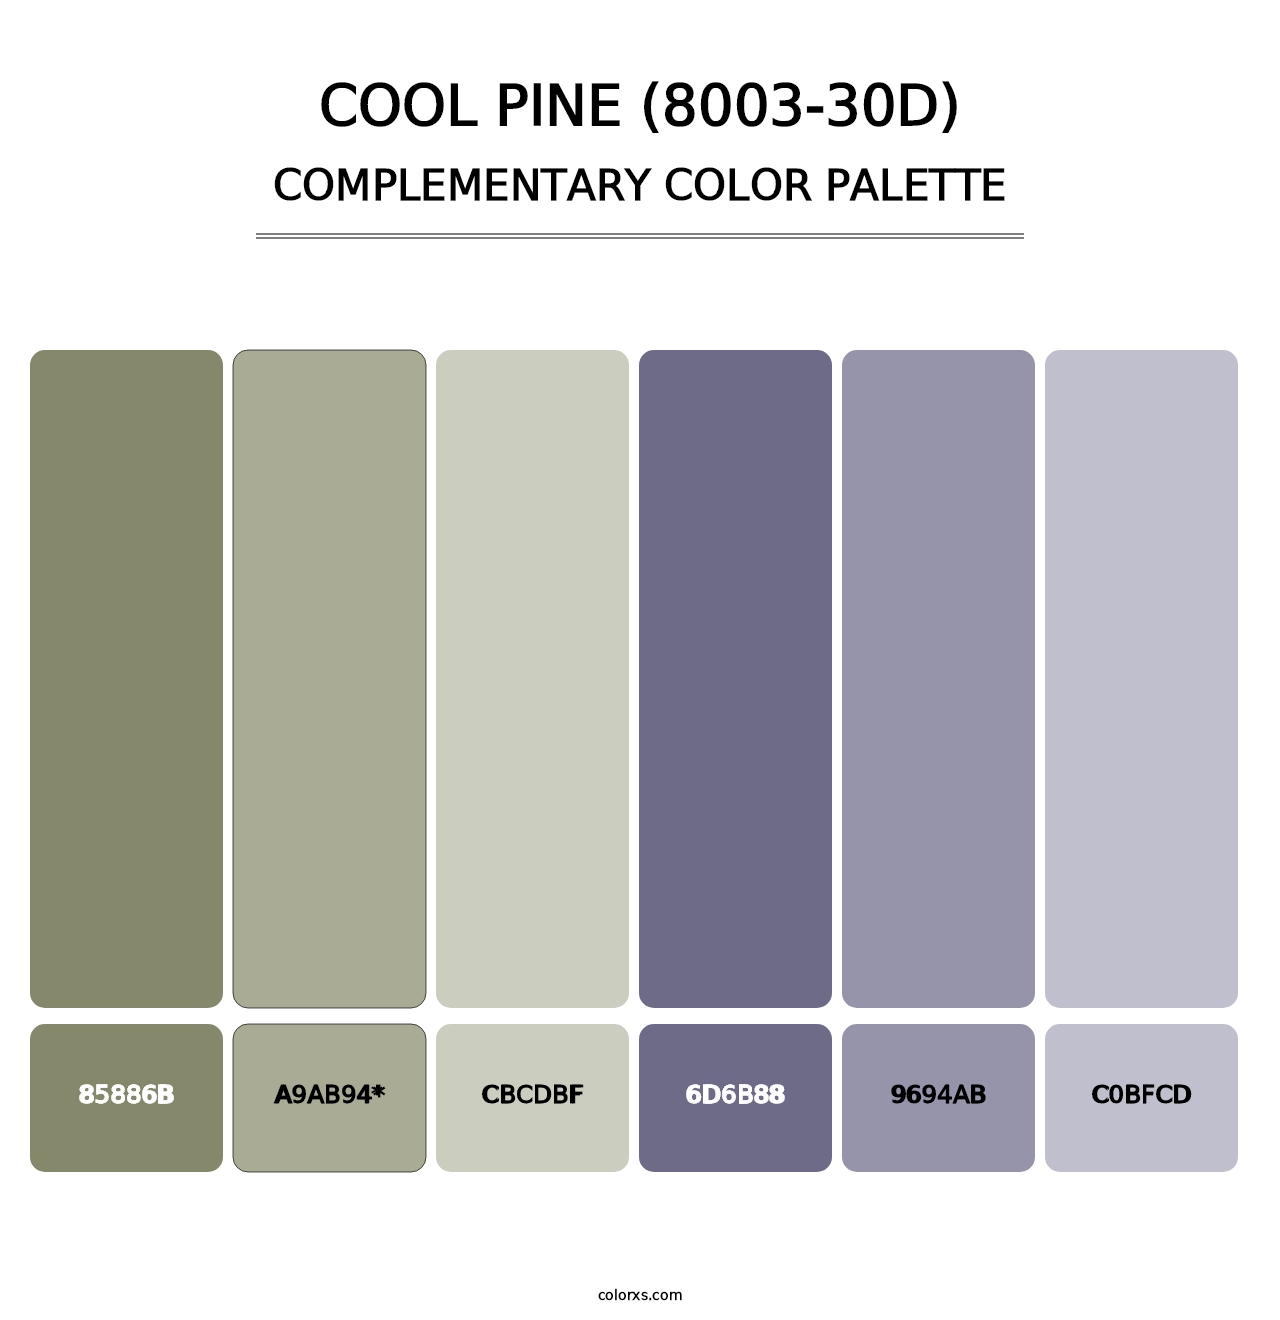 Cool Pine (8003-30D) - Complementary Color Palette